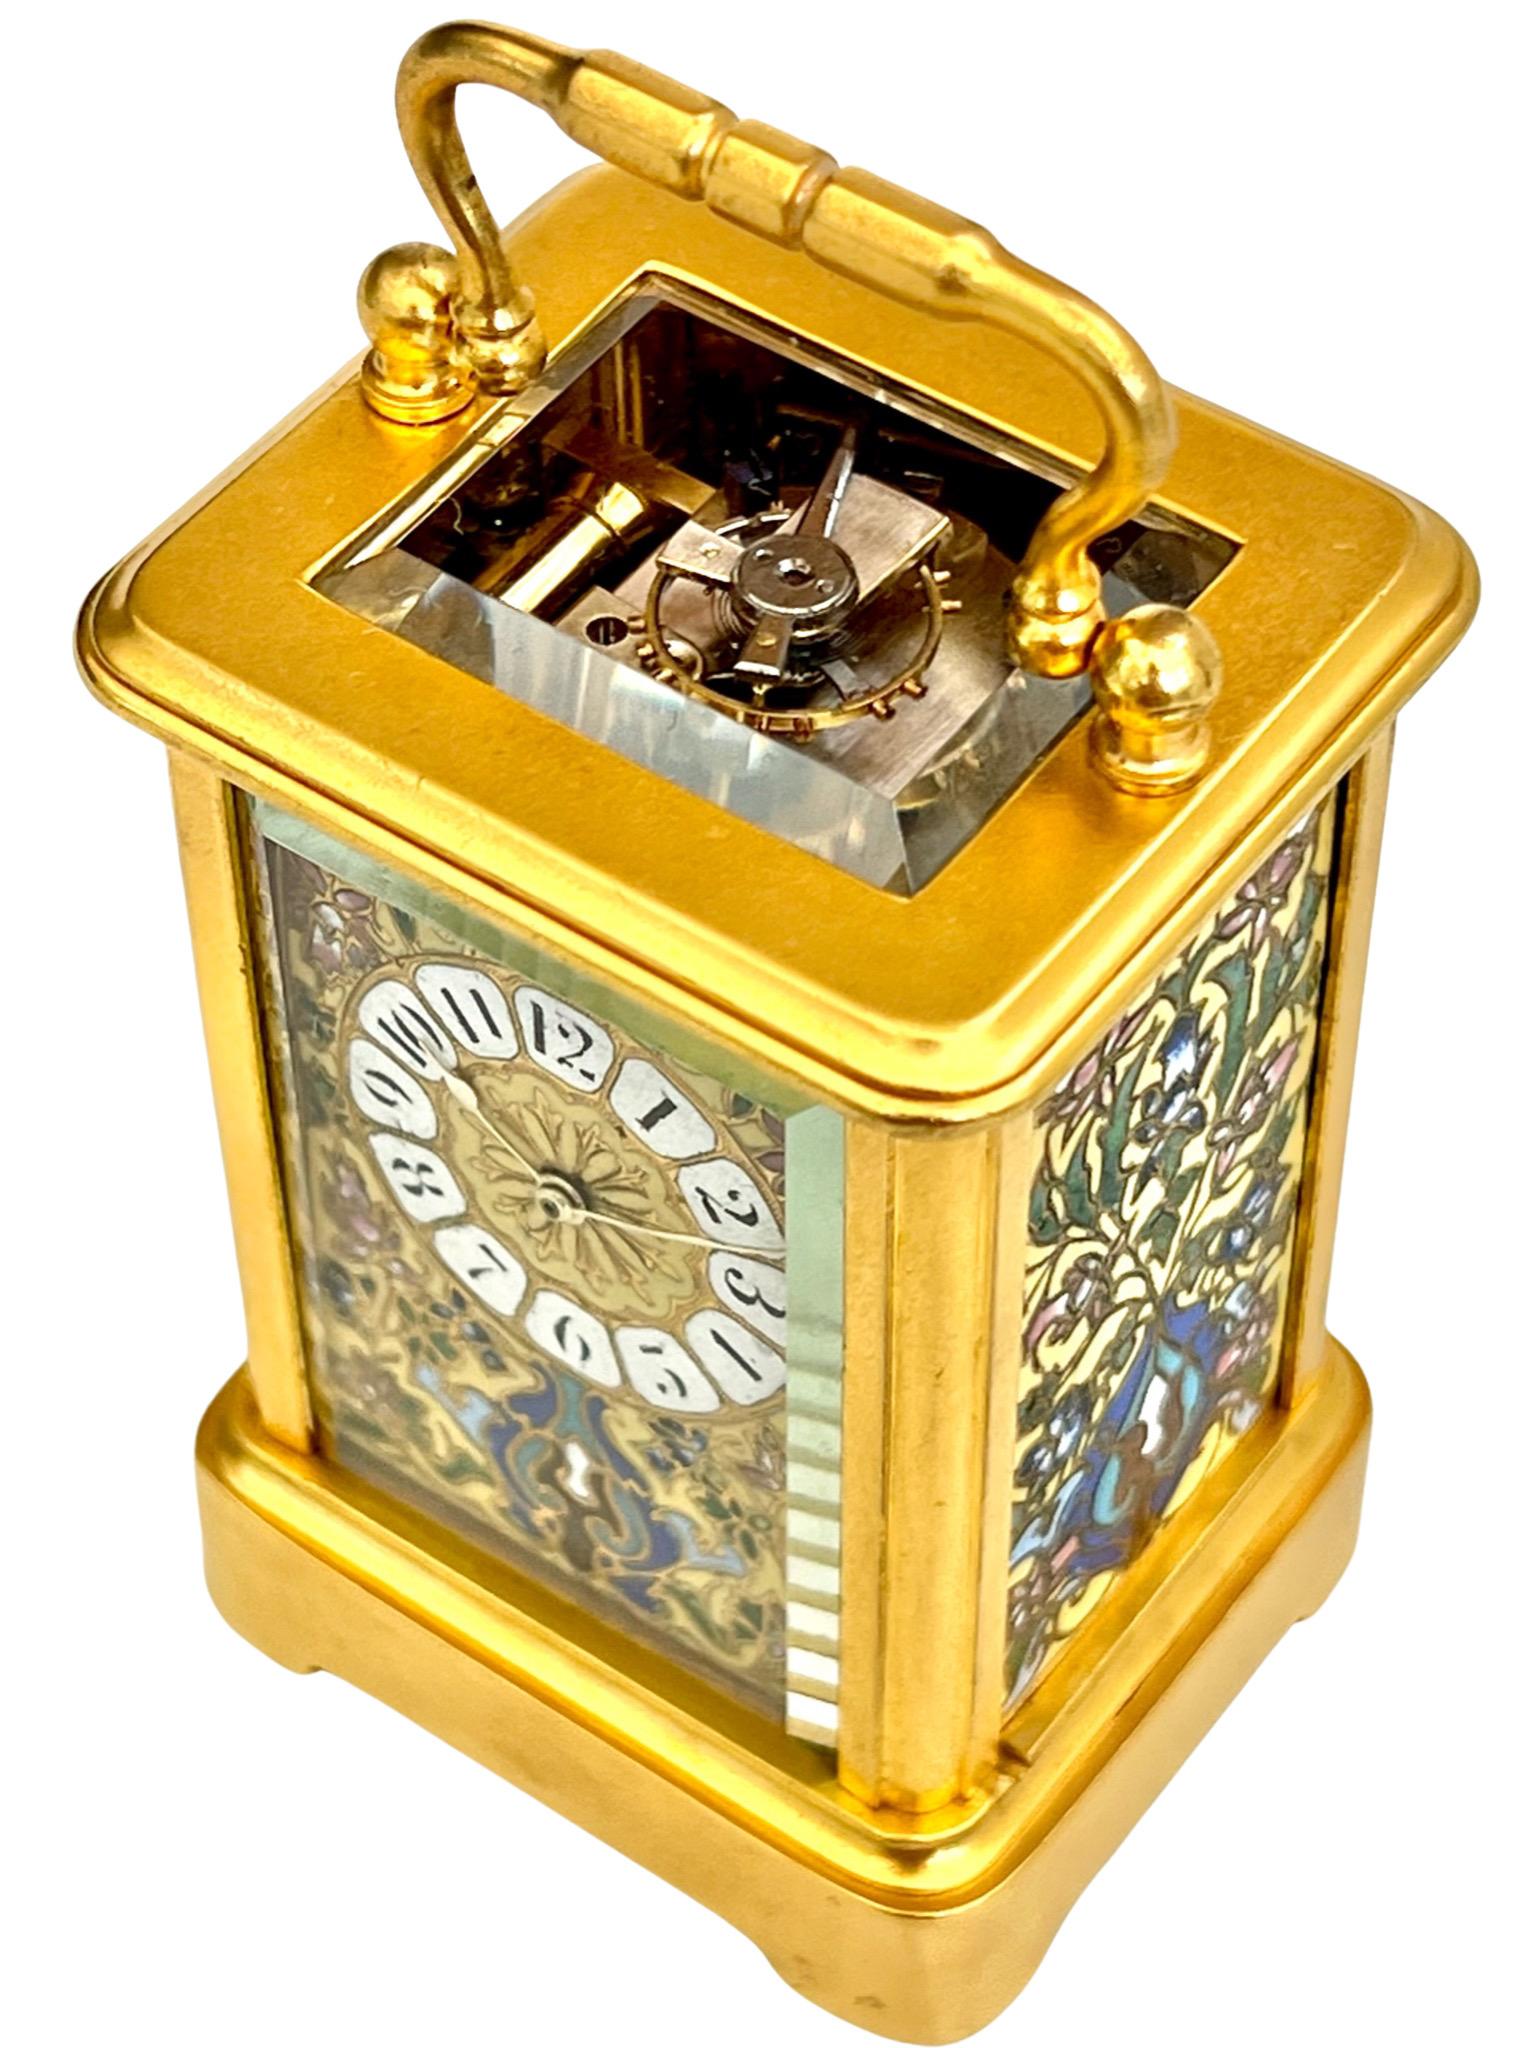 French Miniature Timepiece 8 Day Carriage Clock With Champlevé Enamel Panels For Sale 6